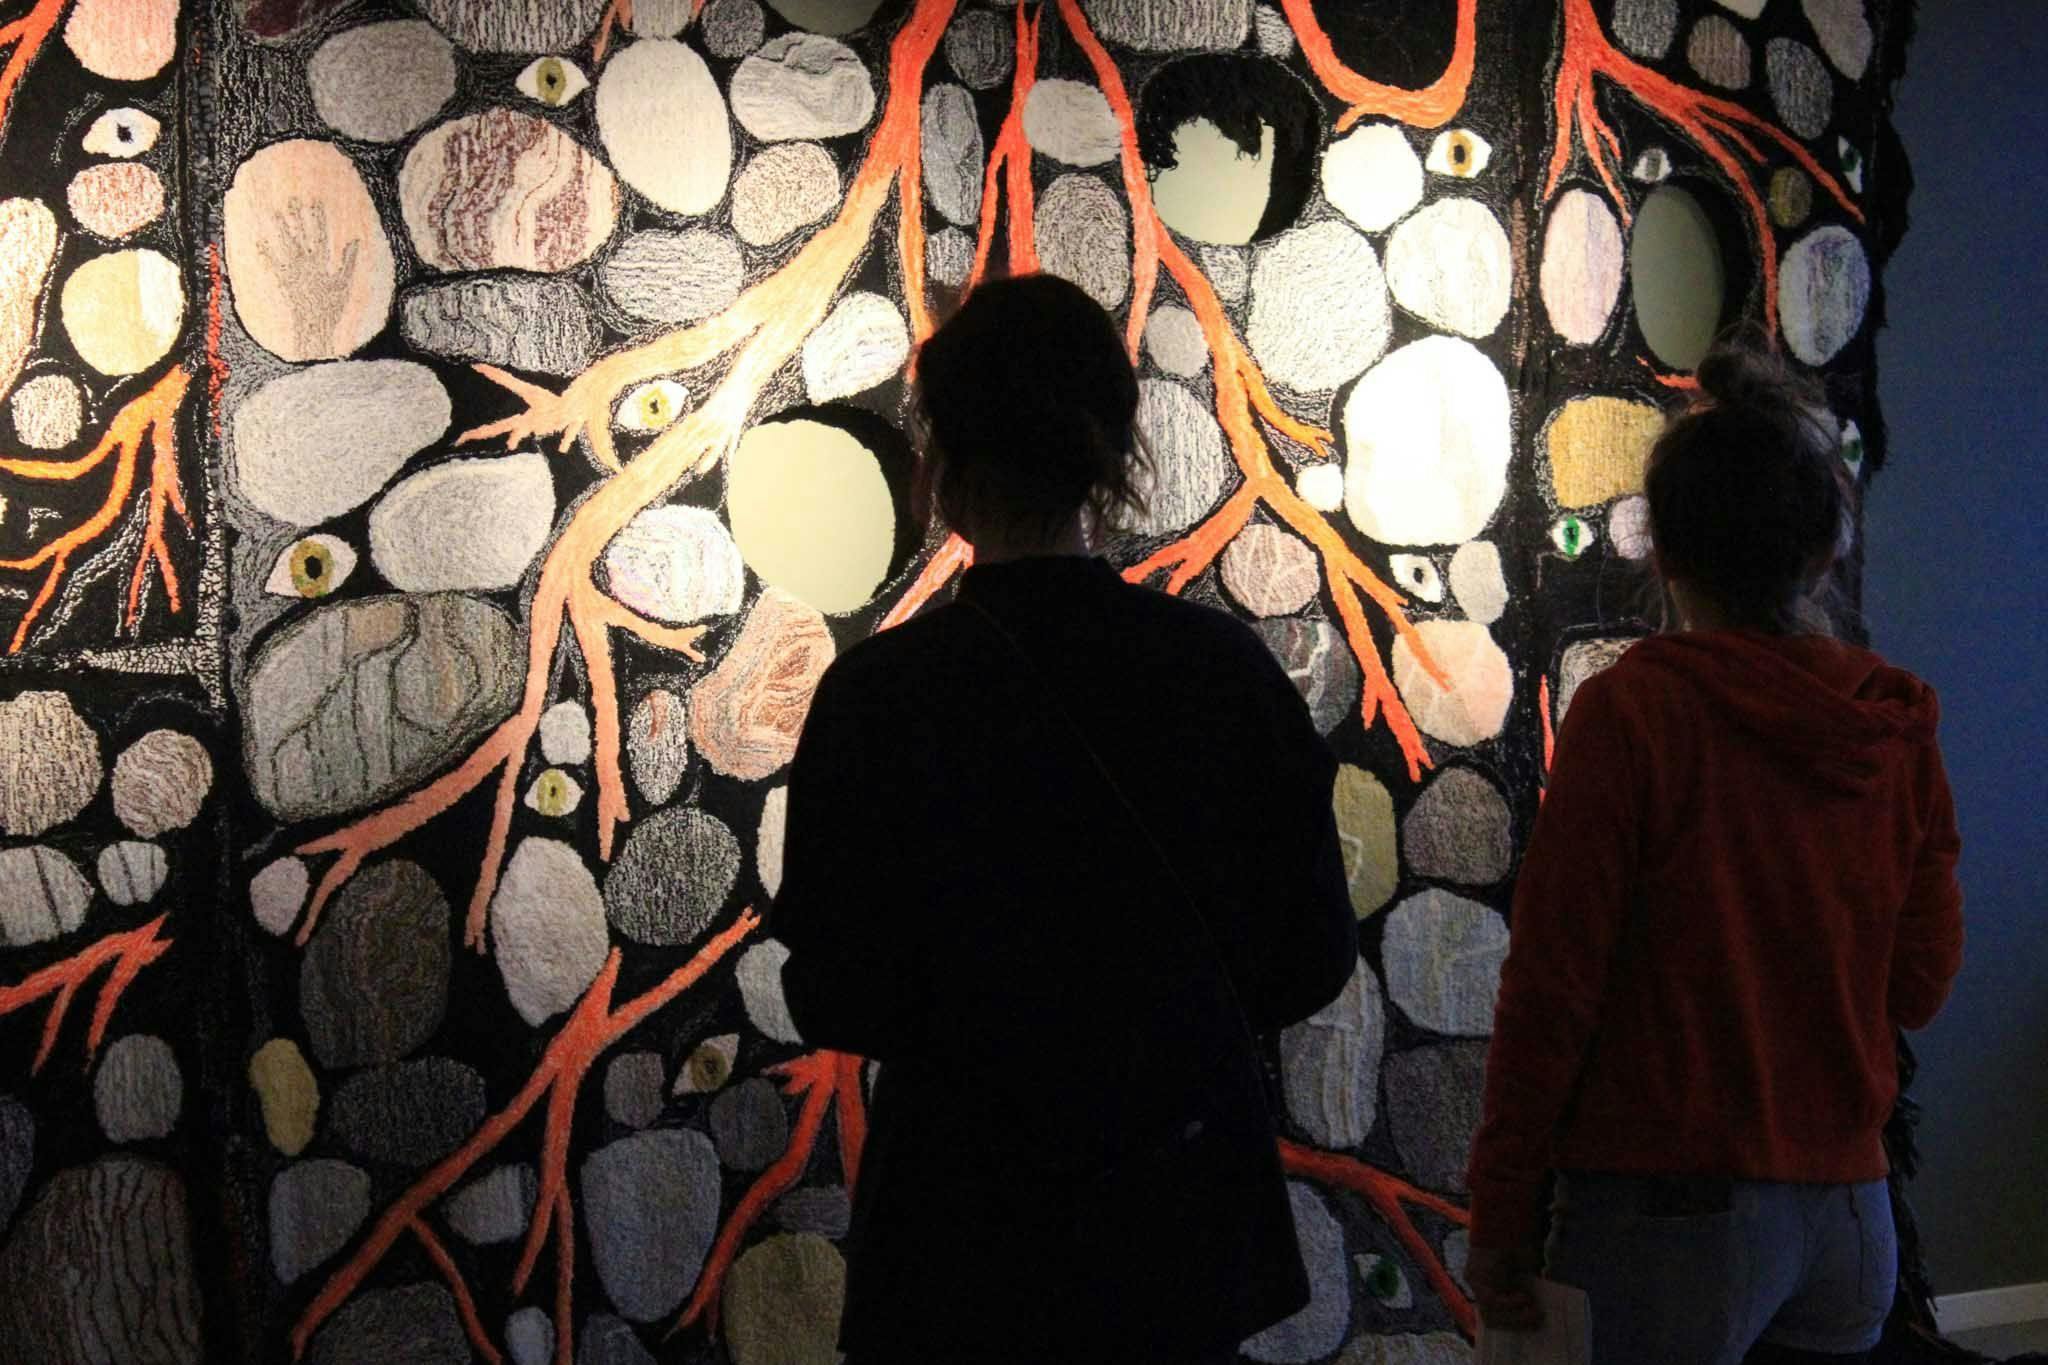 Two people stand in front of a large textile depicting roots and eyes